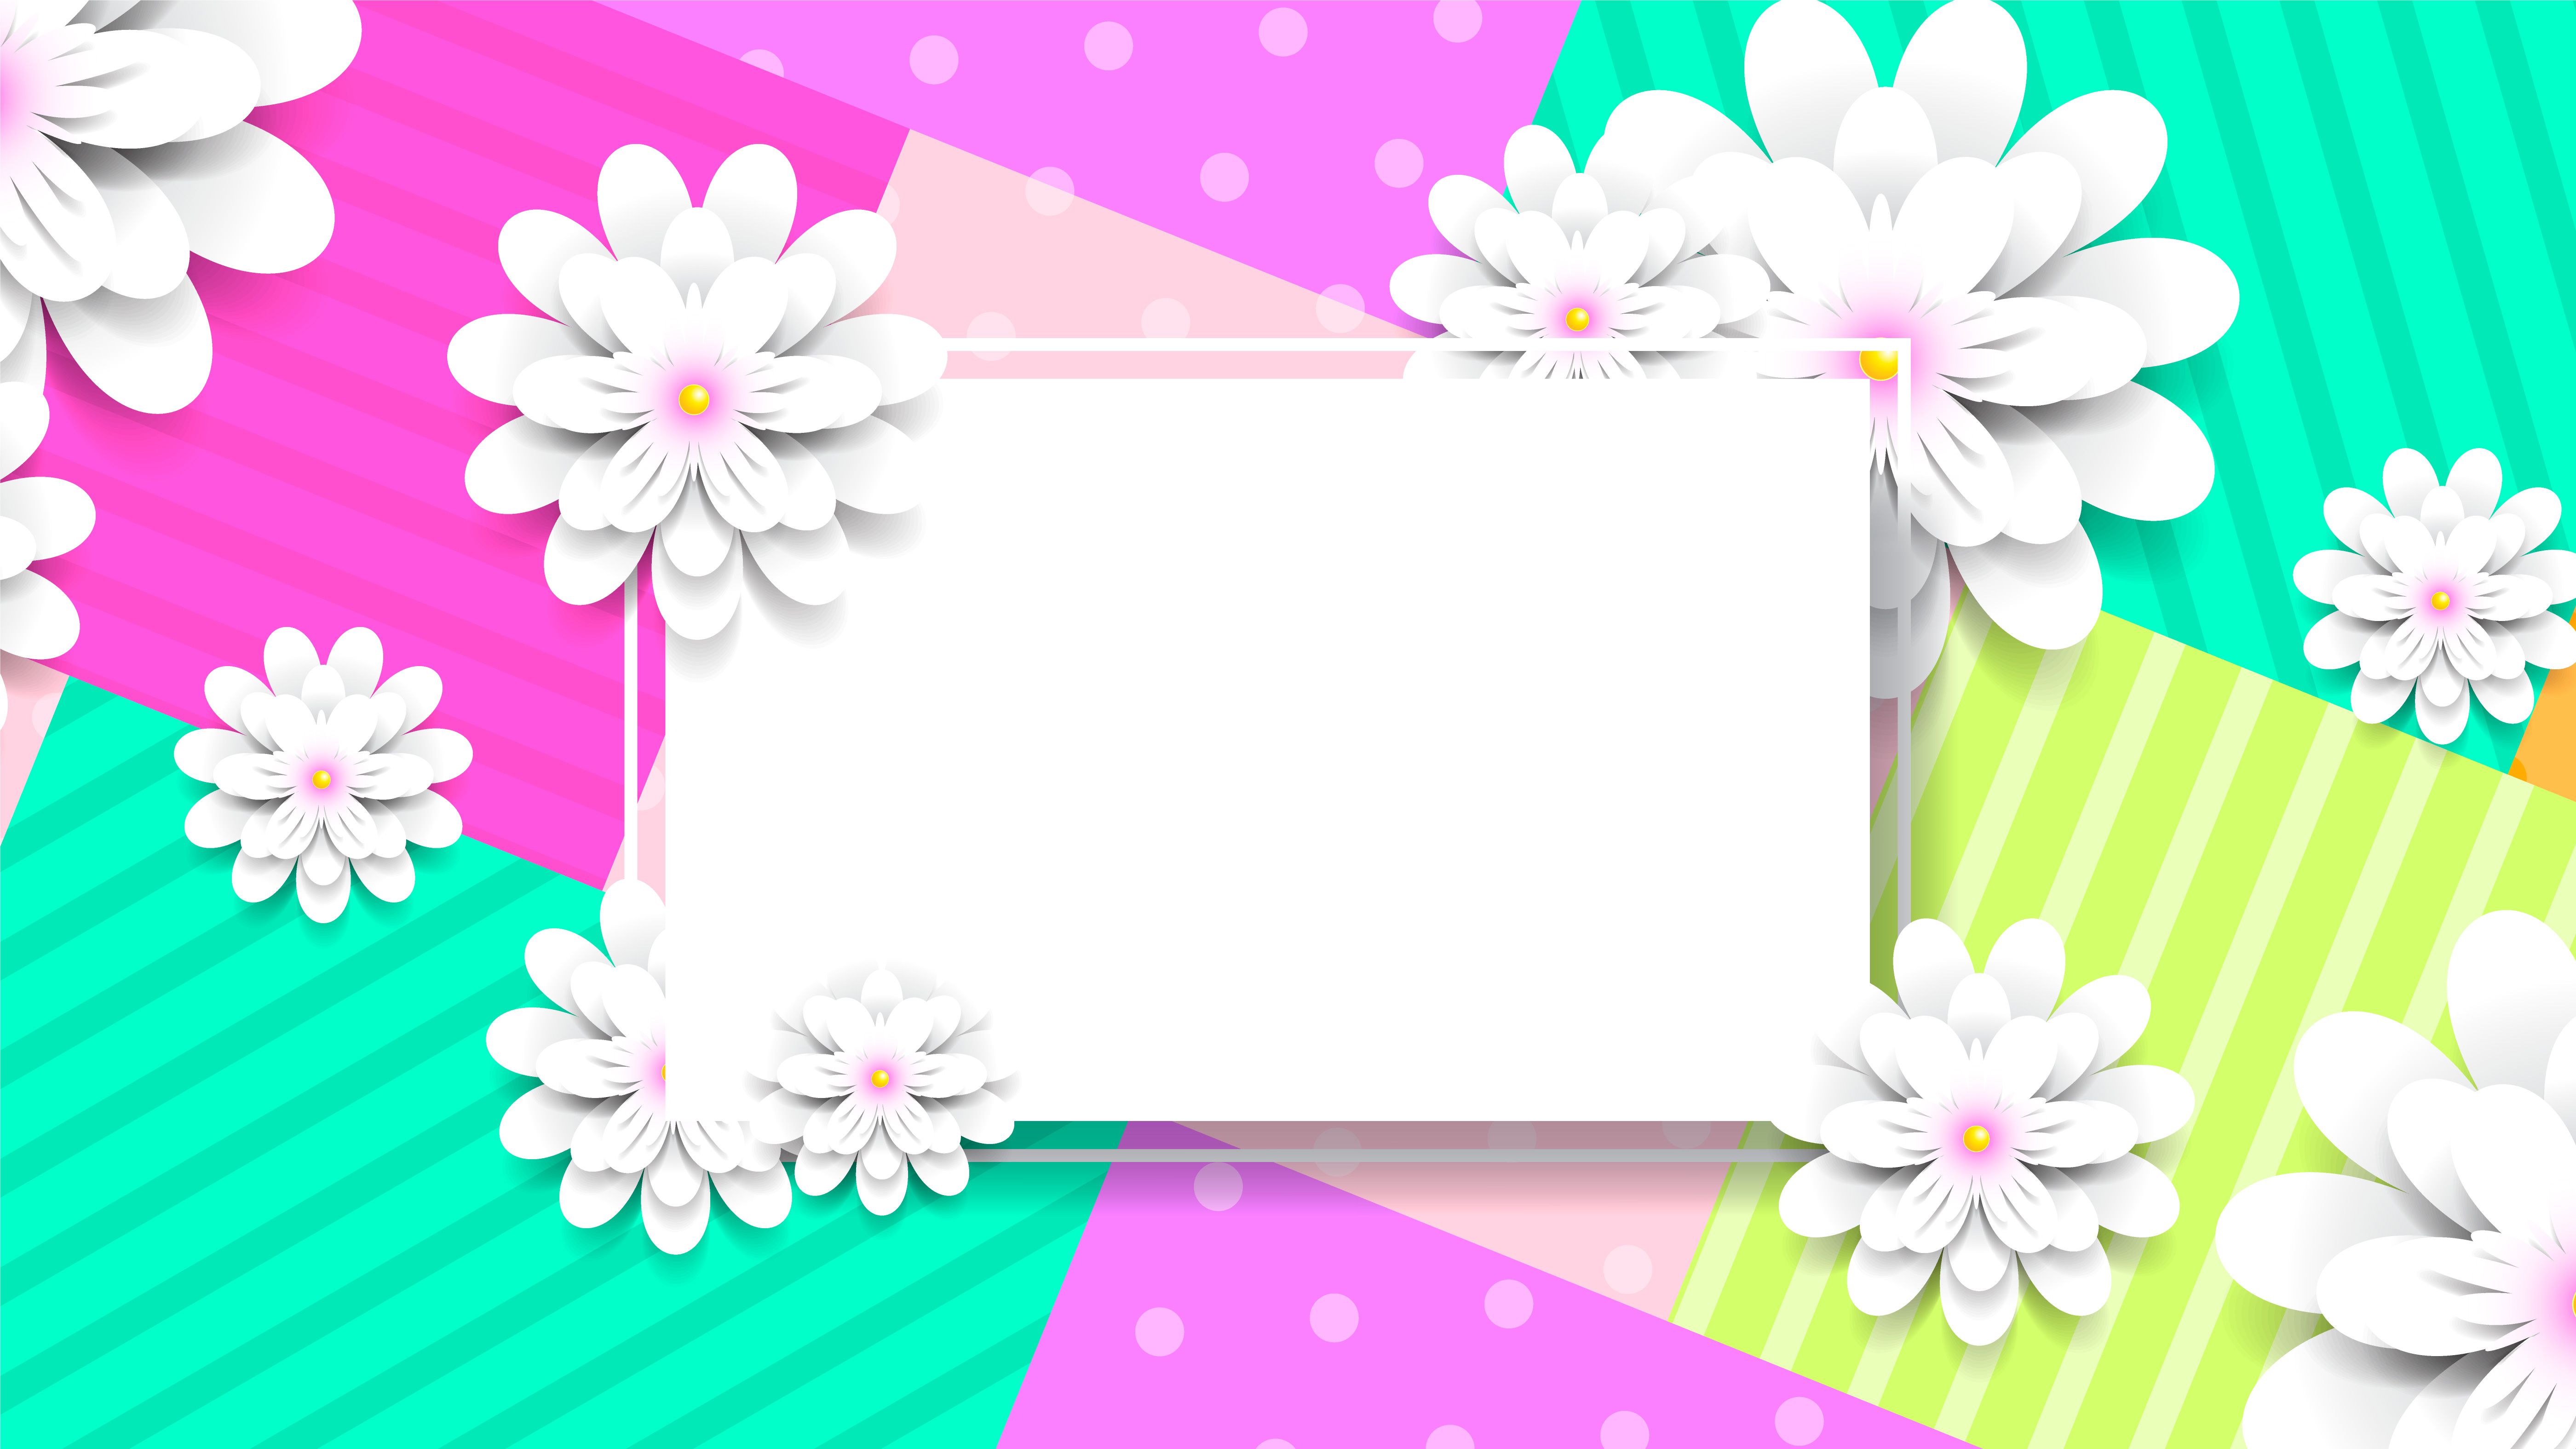 Colorful Paper Flowers Wallpaper With Text Box Vector Wallpaper Vector Free, Download Wallpaper